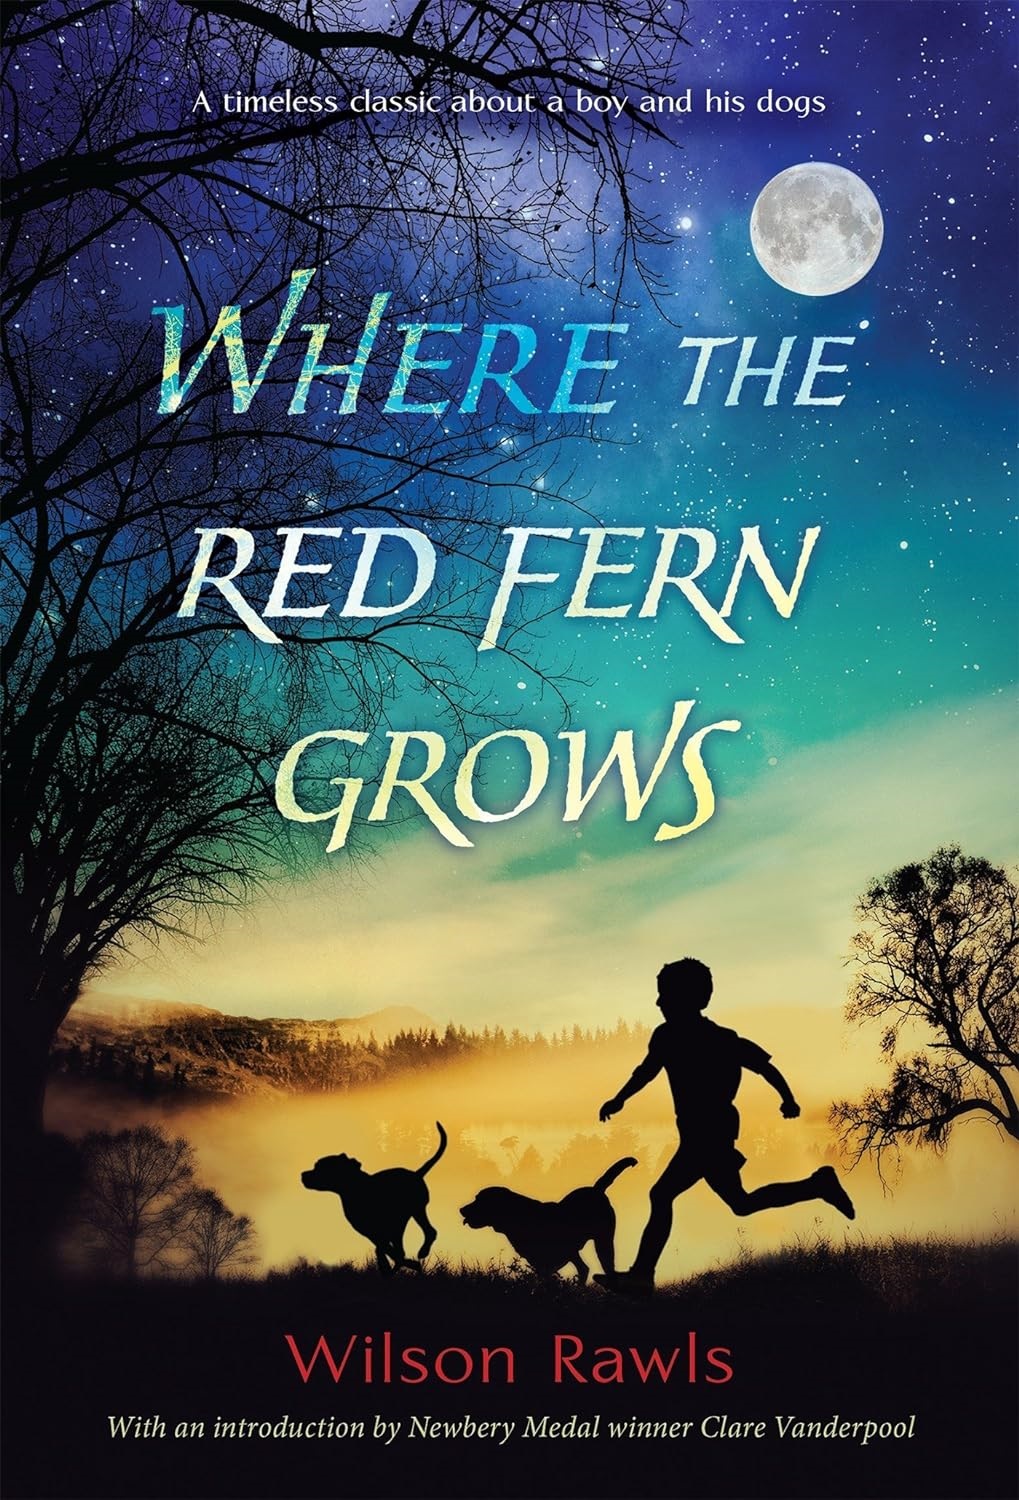 The book cover of Where the Red Fern Grows depicts the silhouette of a boy and two dogs running, against a sunlit sky.